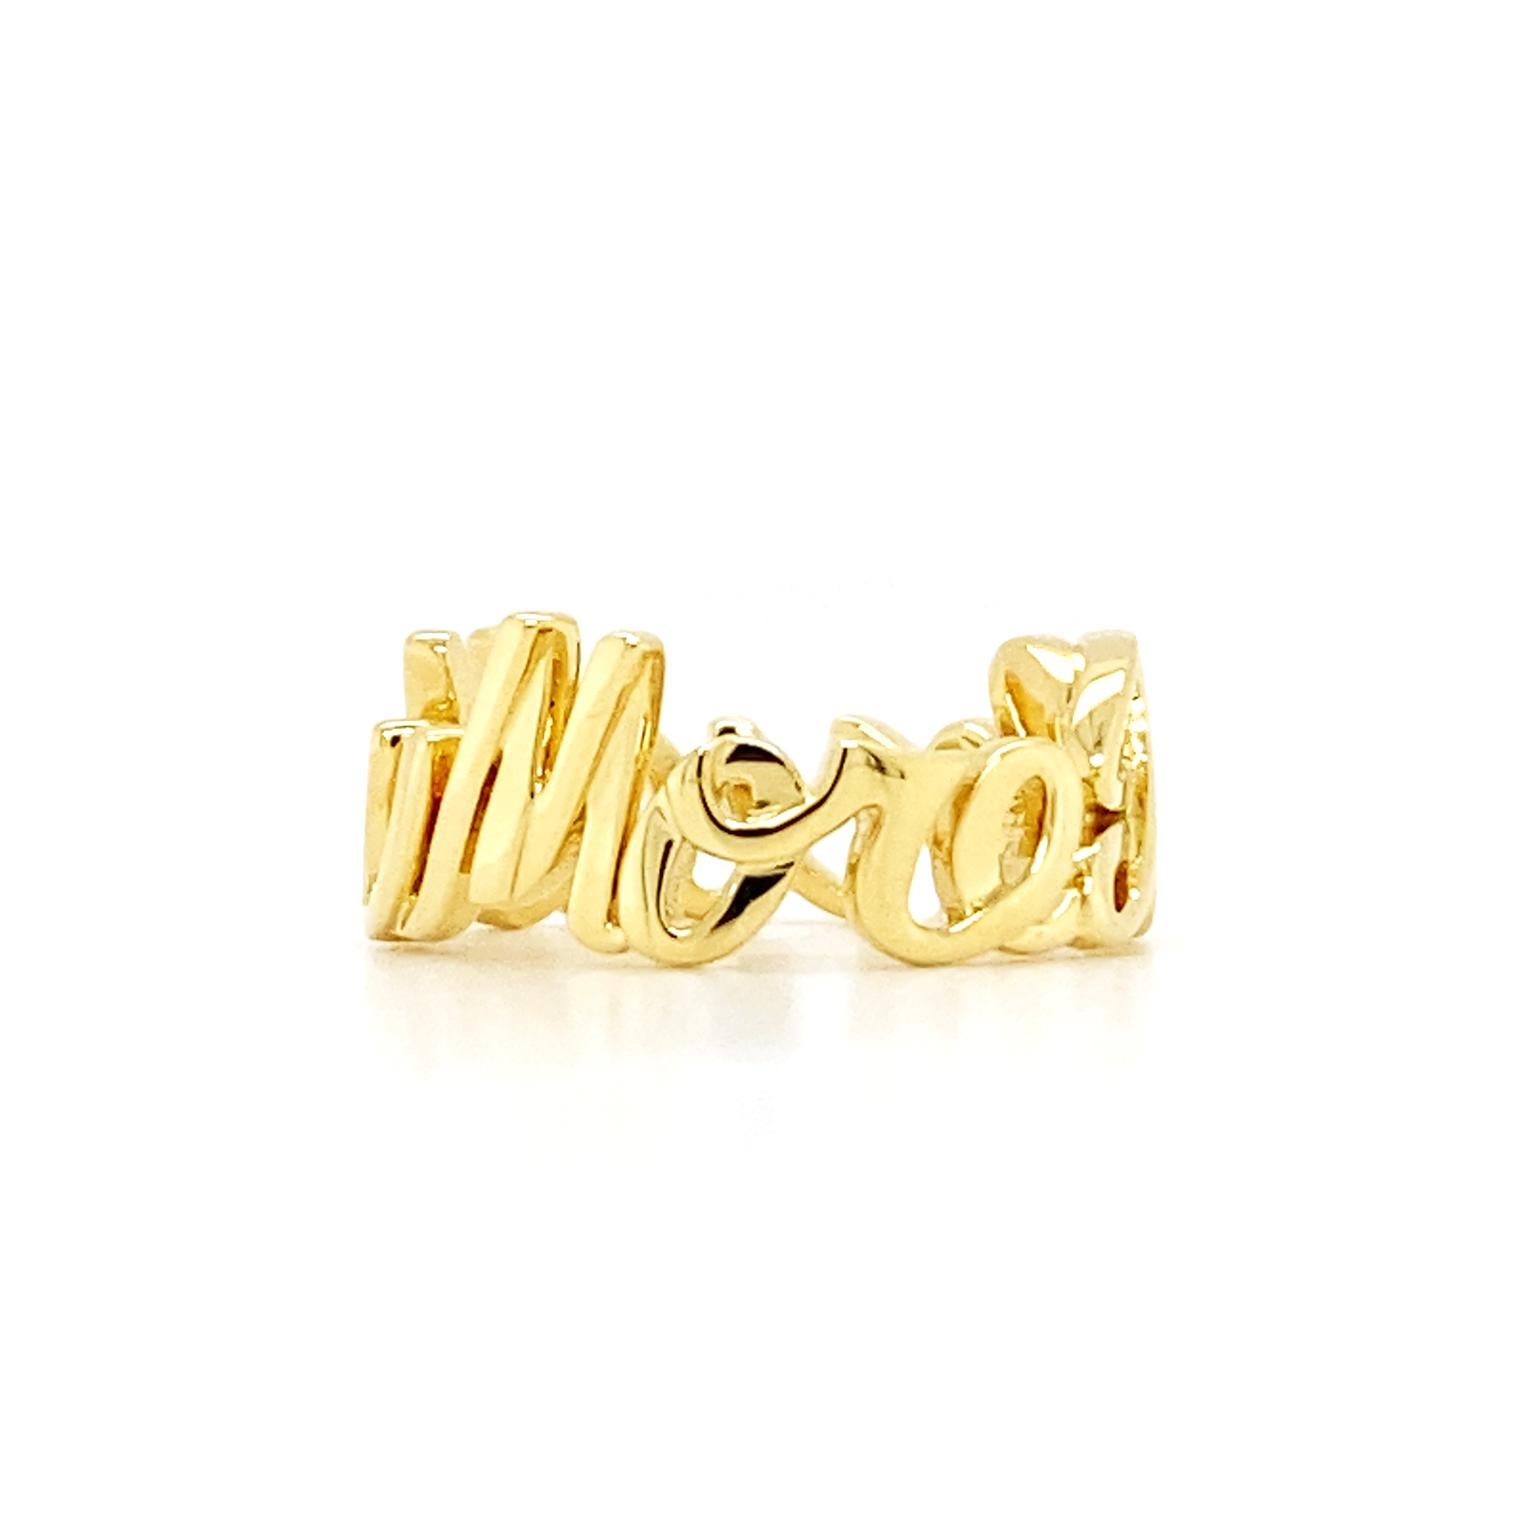 Sleek script of 18k yellow gold glides to pen the endearment, I Love You More. The 8mm tall block letters rotate to form the band, which is polished to glisten. Measurements for the ring are 20.7mm (width) by 8.46 mm (height) by 21.16mm (depth).